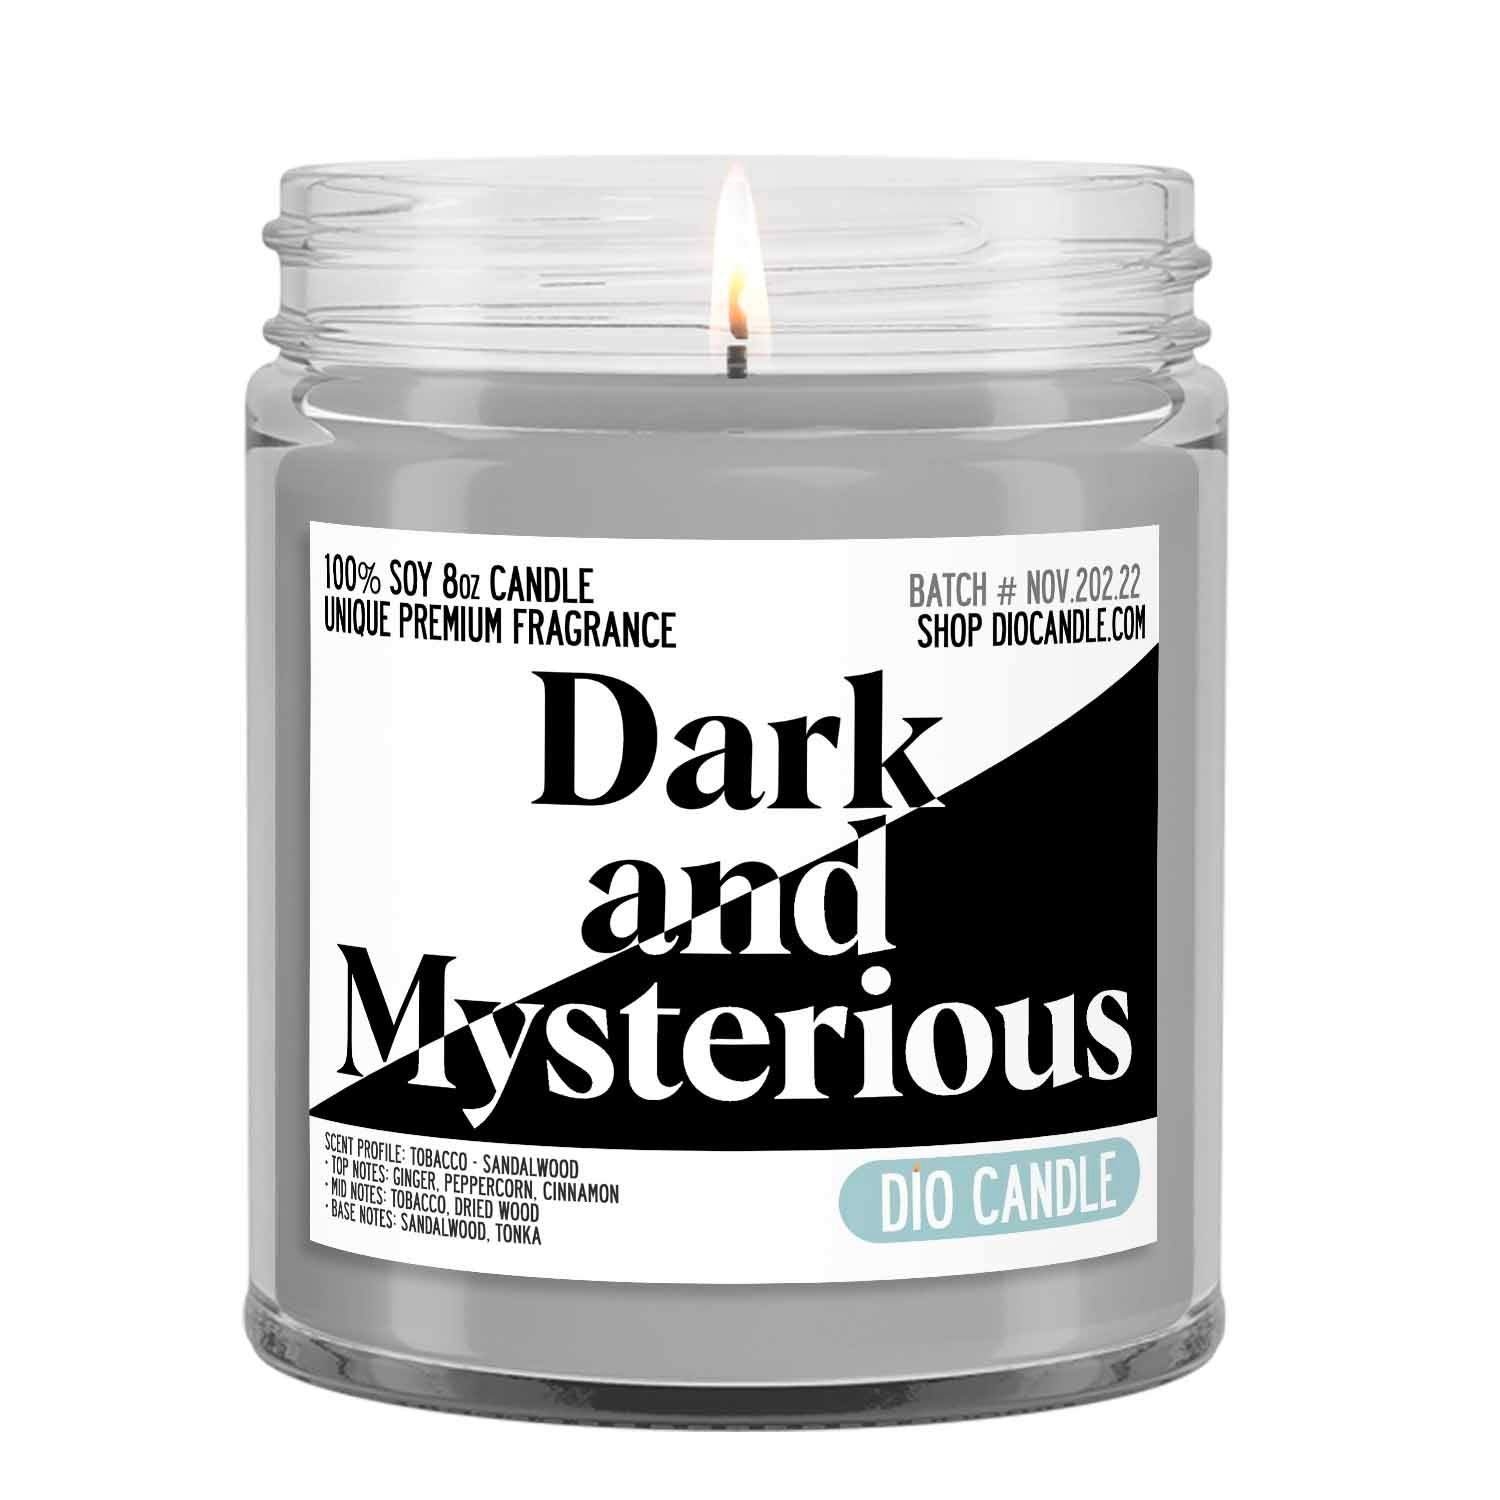 Dark Mysterious Candle - Tobacco - Sandalwood - Cologne Scented